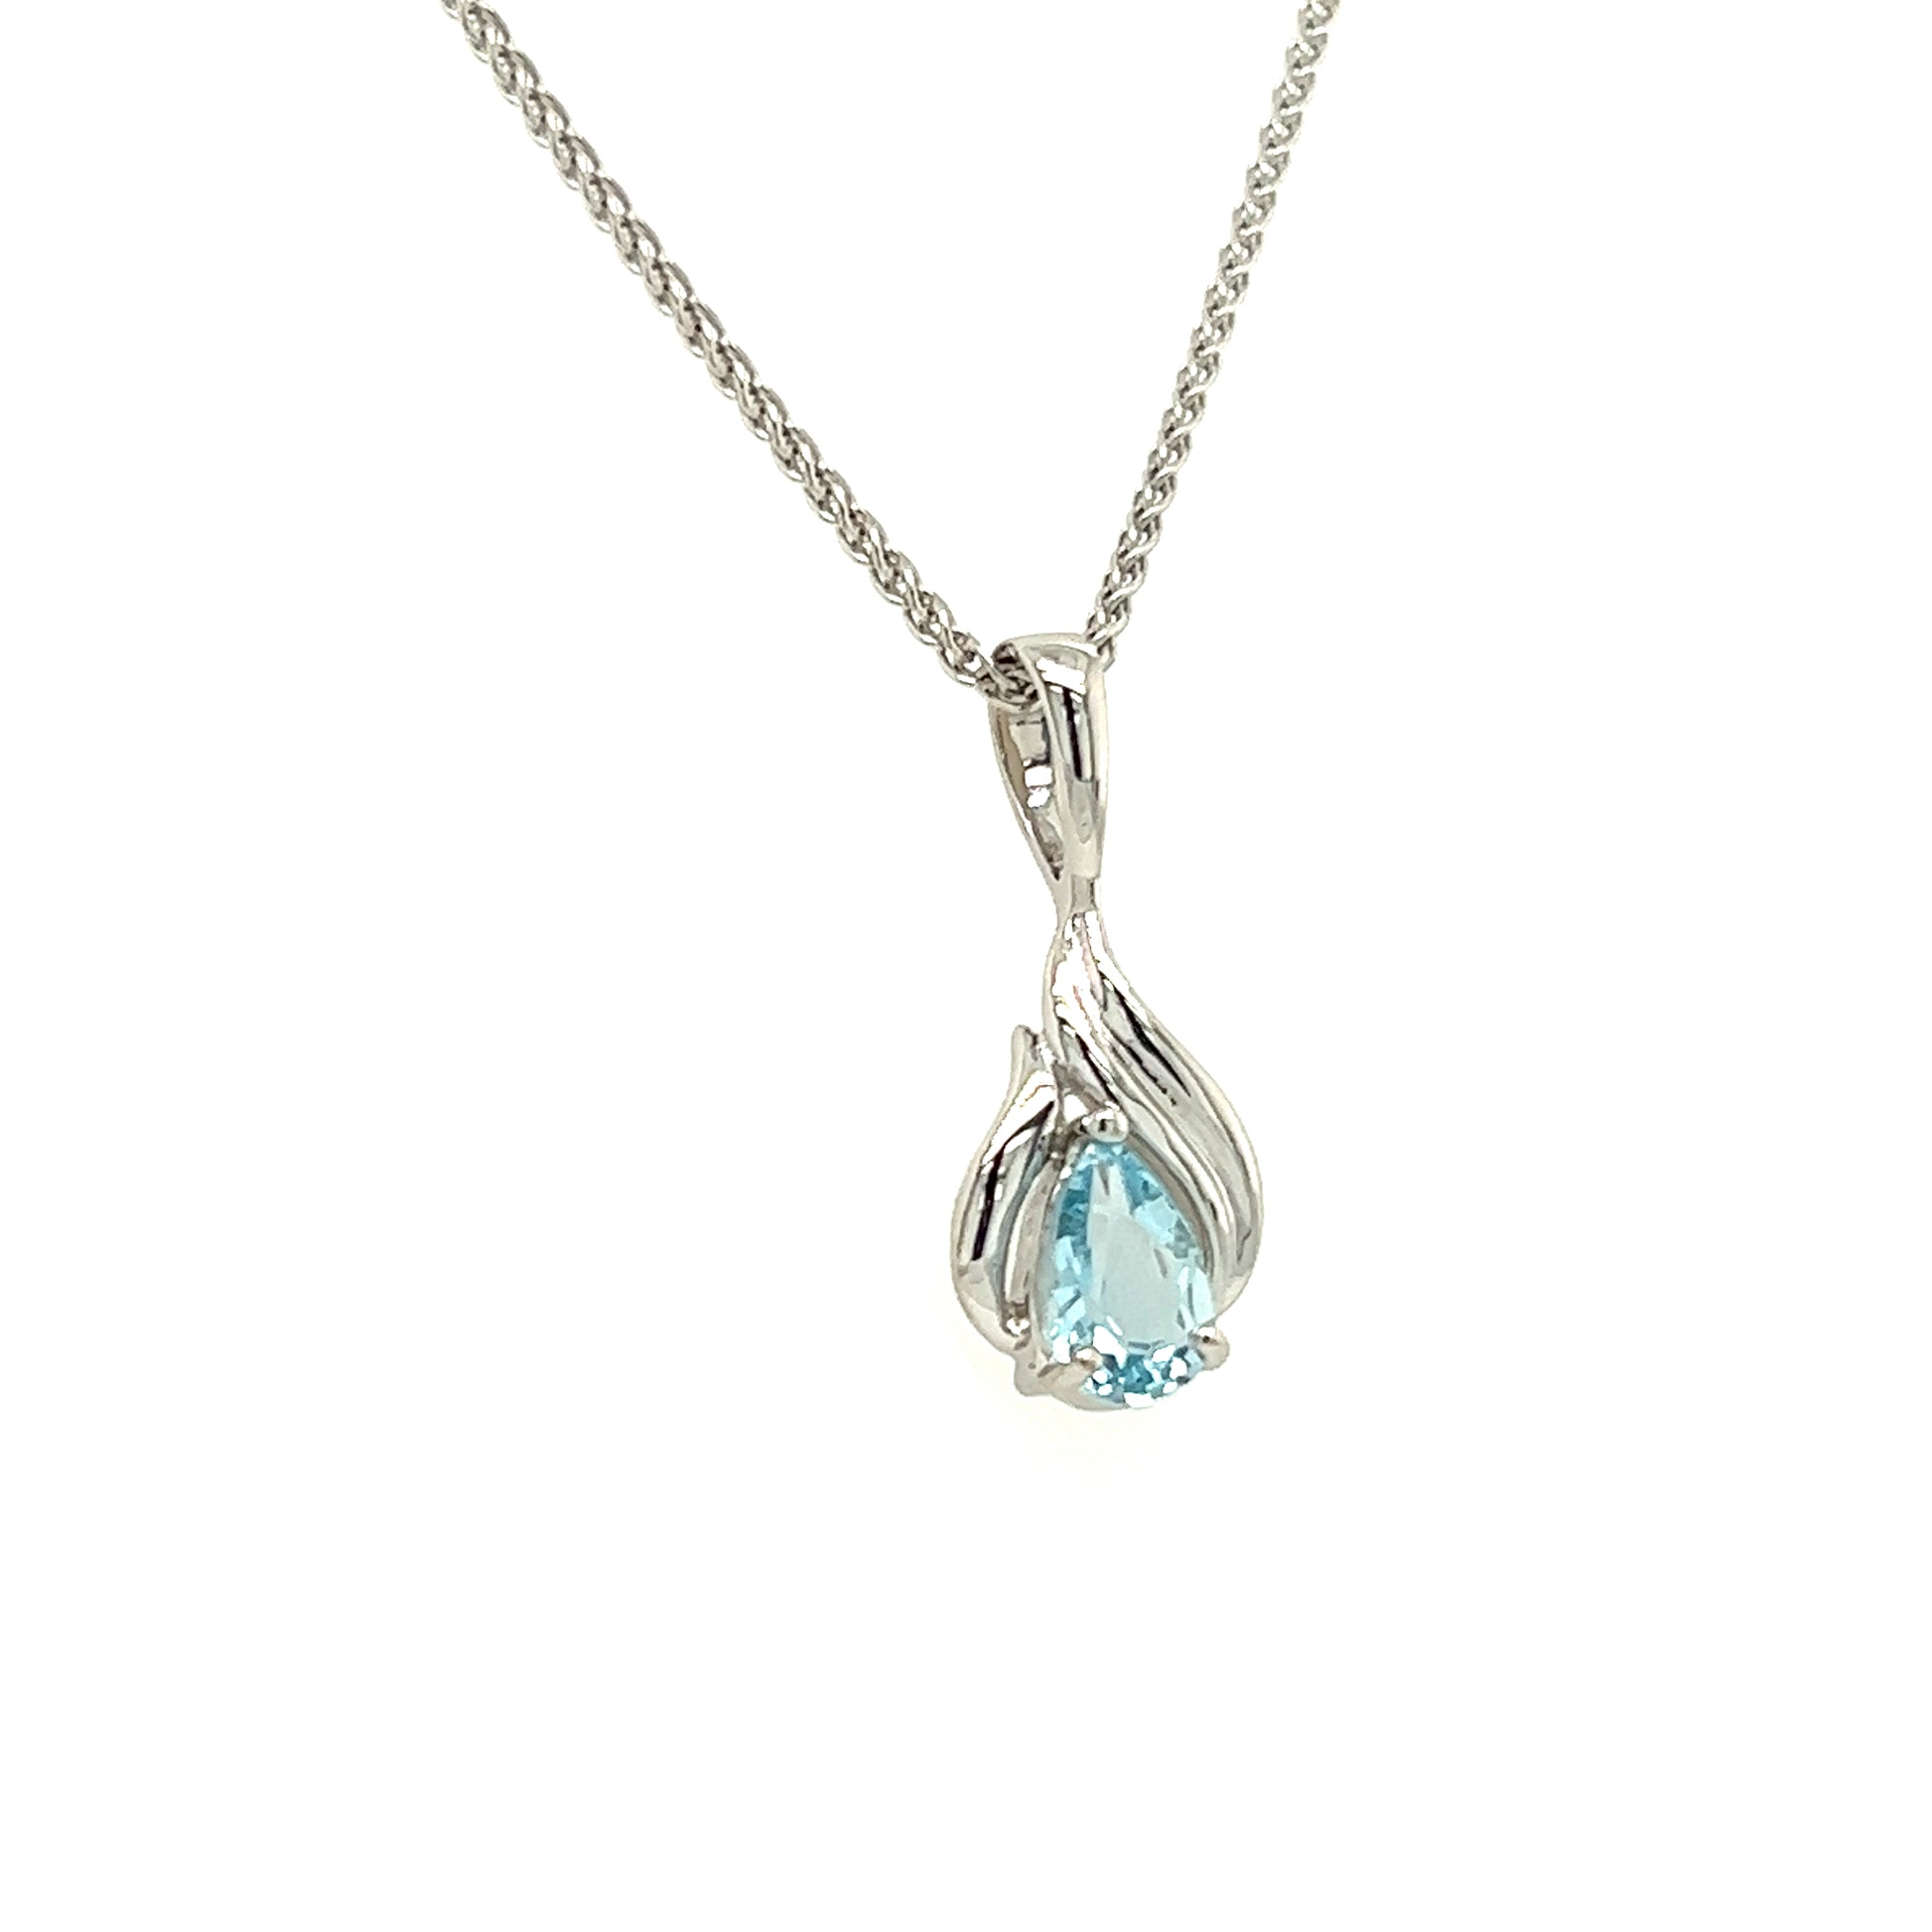 Pear Aquamarine Pendant with Flame Motif in 14K White Gold Pendant and Chain Left Side View